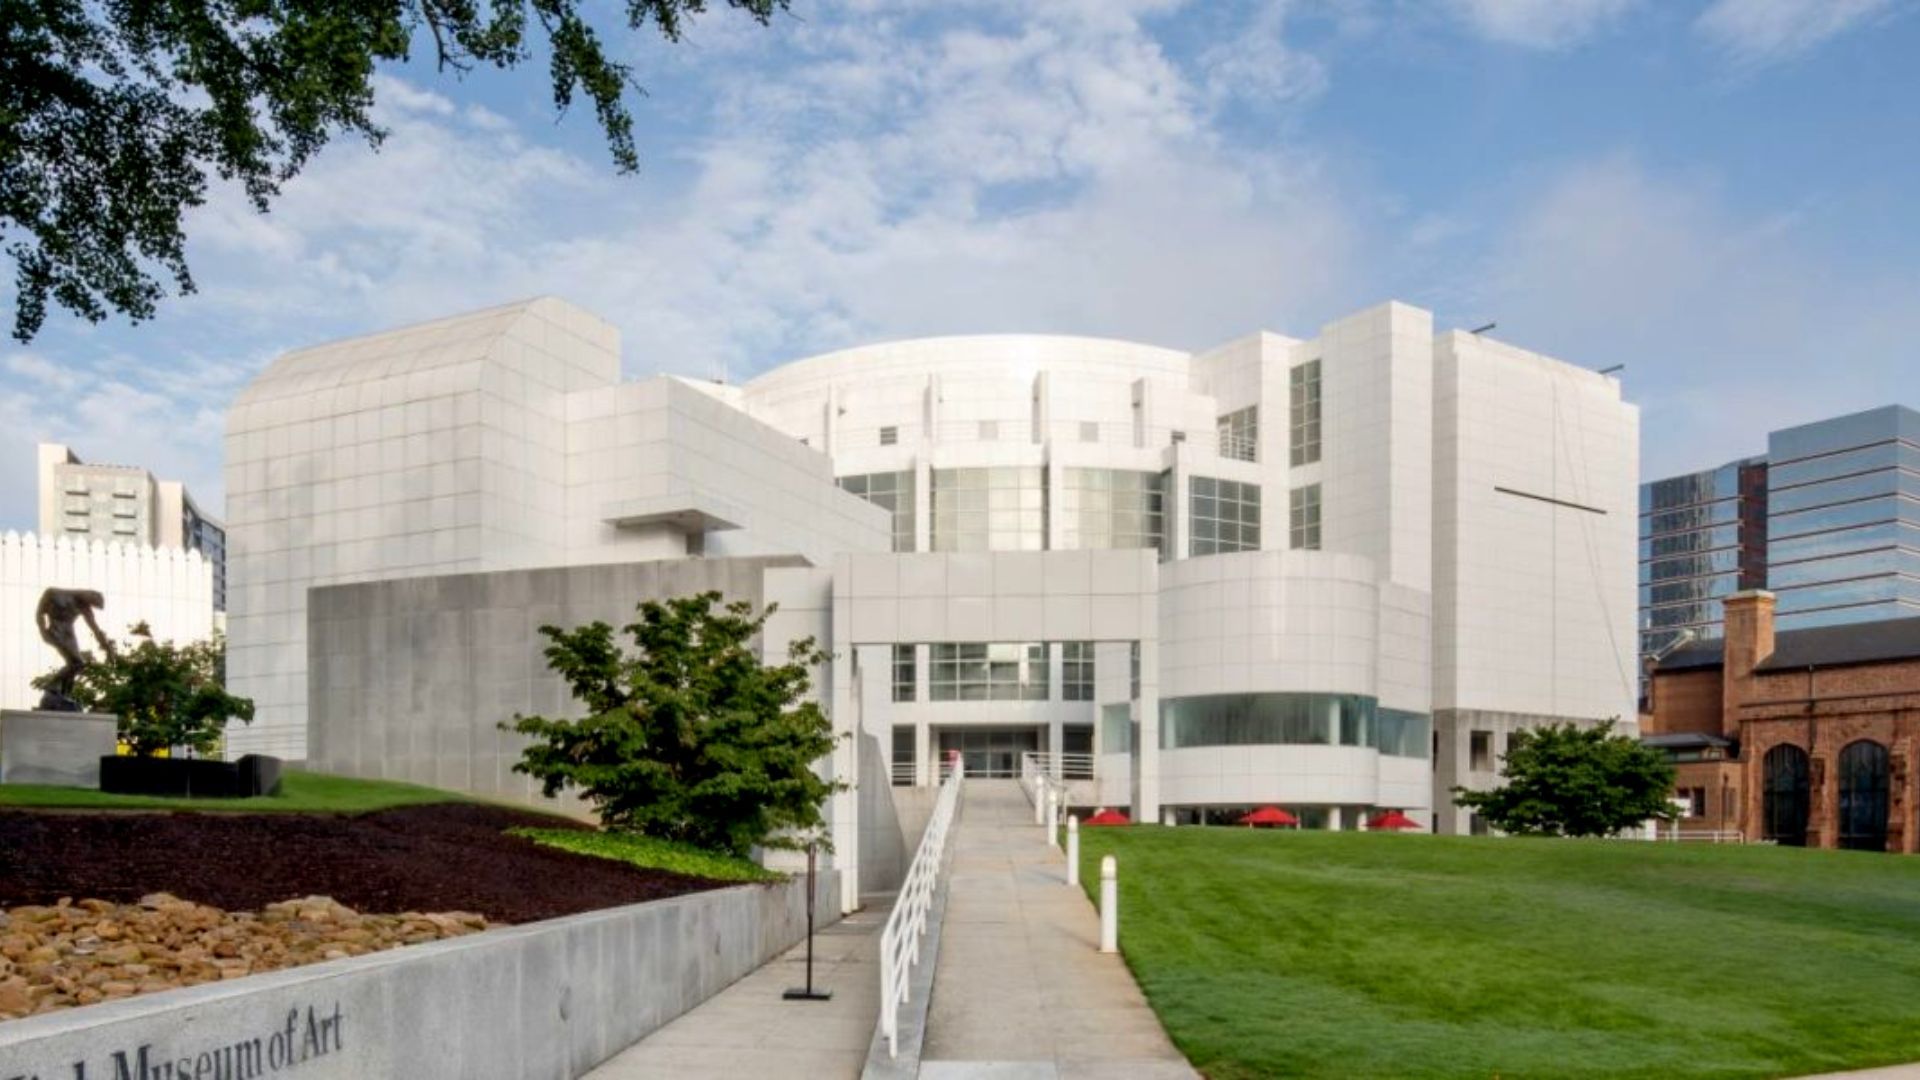 Black Panther filming locations- High Museum of Art